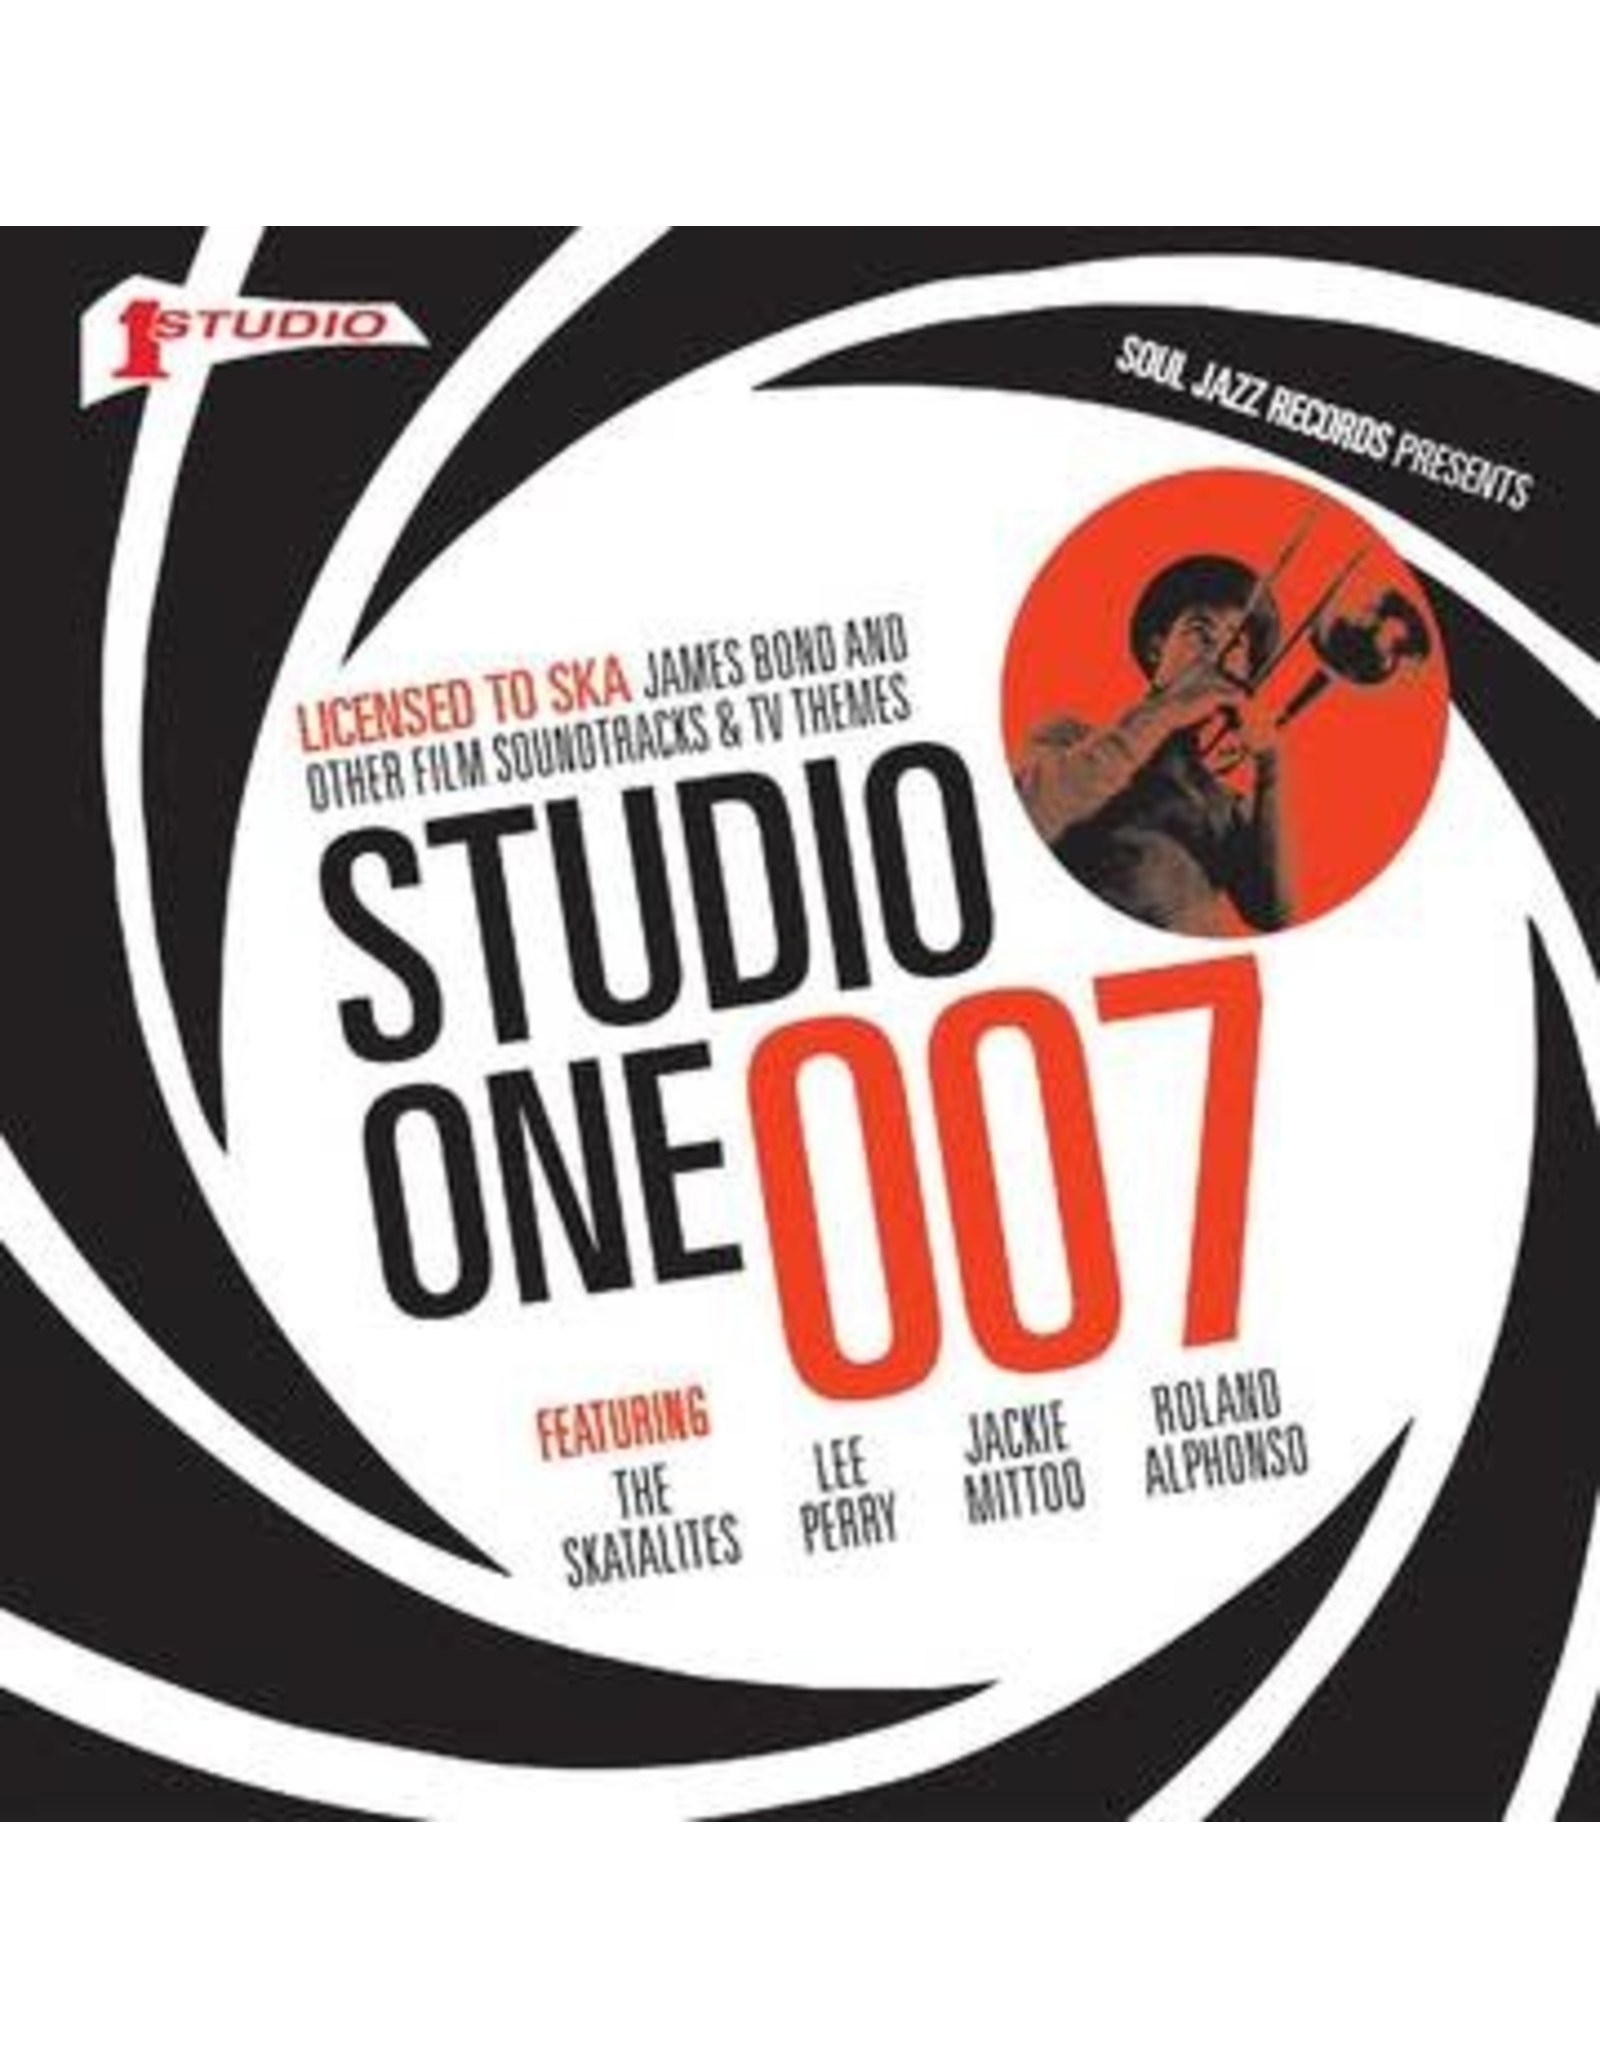 Soul Jazz Various: 2020RSD - Studio One 007: Licensed To Ska! James Bond and other Film Soundtracks & TV Themes 5x7" BOX